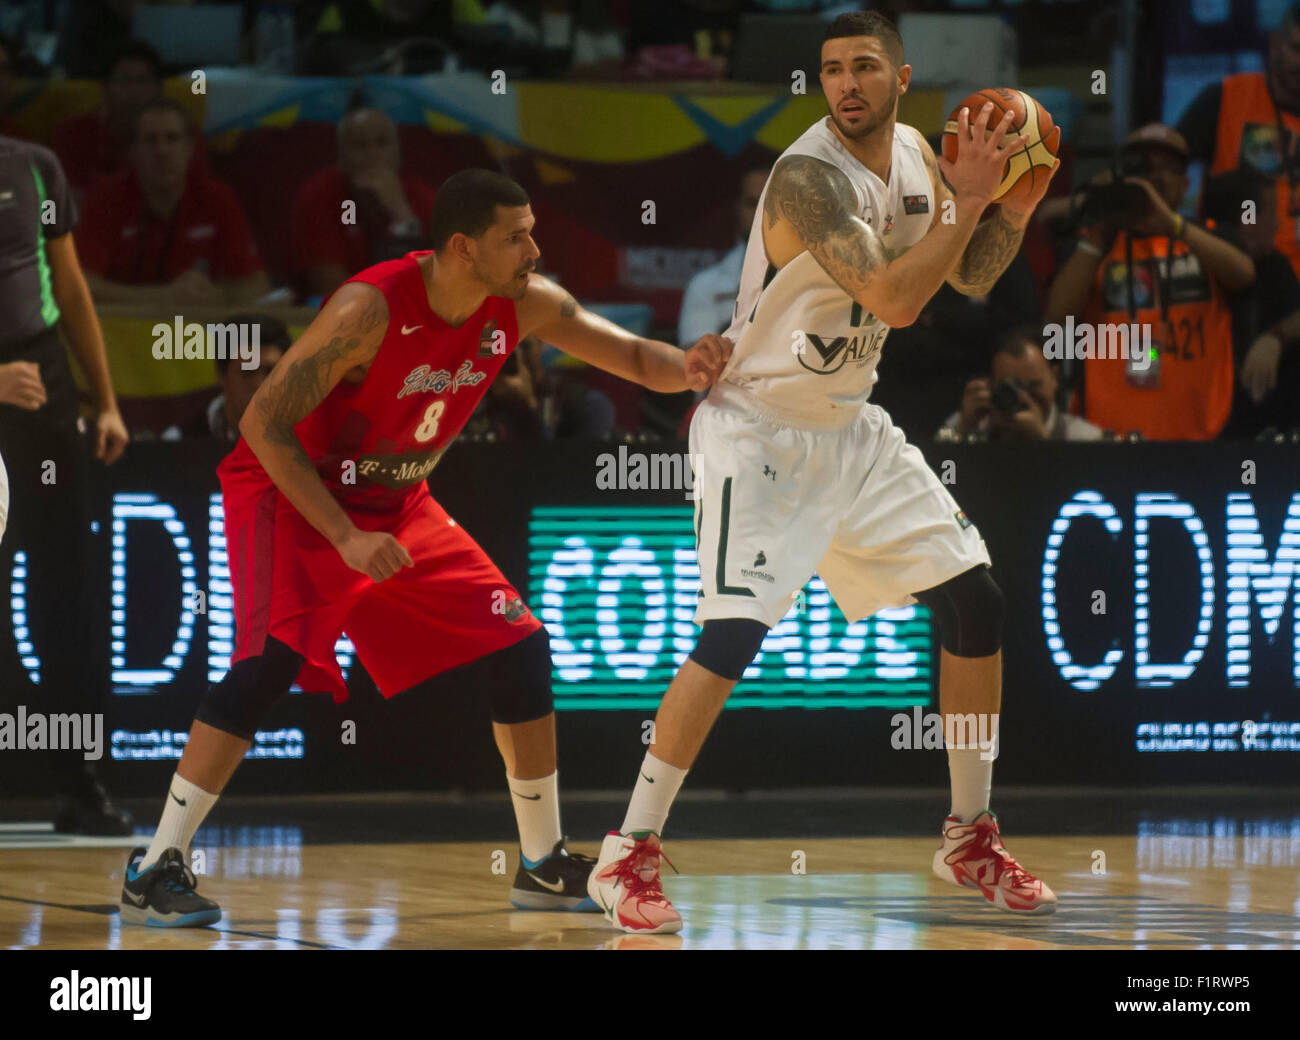 Mexico City, Mexico. 6th Sep, 2015. Mexico's Hector Hernandez (R) vies for the ball with Angel Vasallo of Puerto Rico during their match at the FIBA Americas 2015, held in the Palacio de los Deportes, in Mexico City, capital of Mexico, on Sept. 6, 2015. Mexico won the match. Credit:  Oscar Ramirez/Xinhua/Alamy Live News Stock Photo